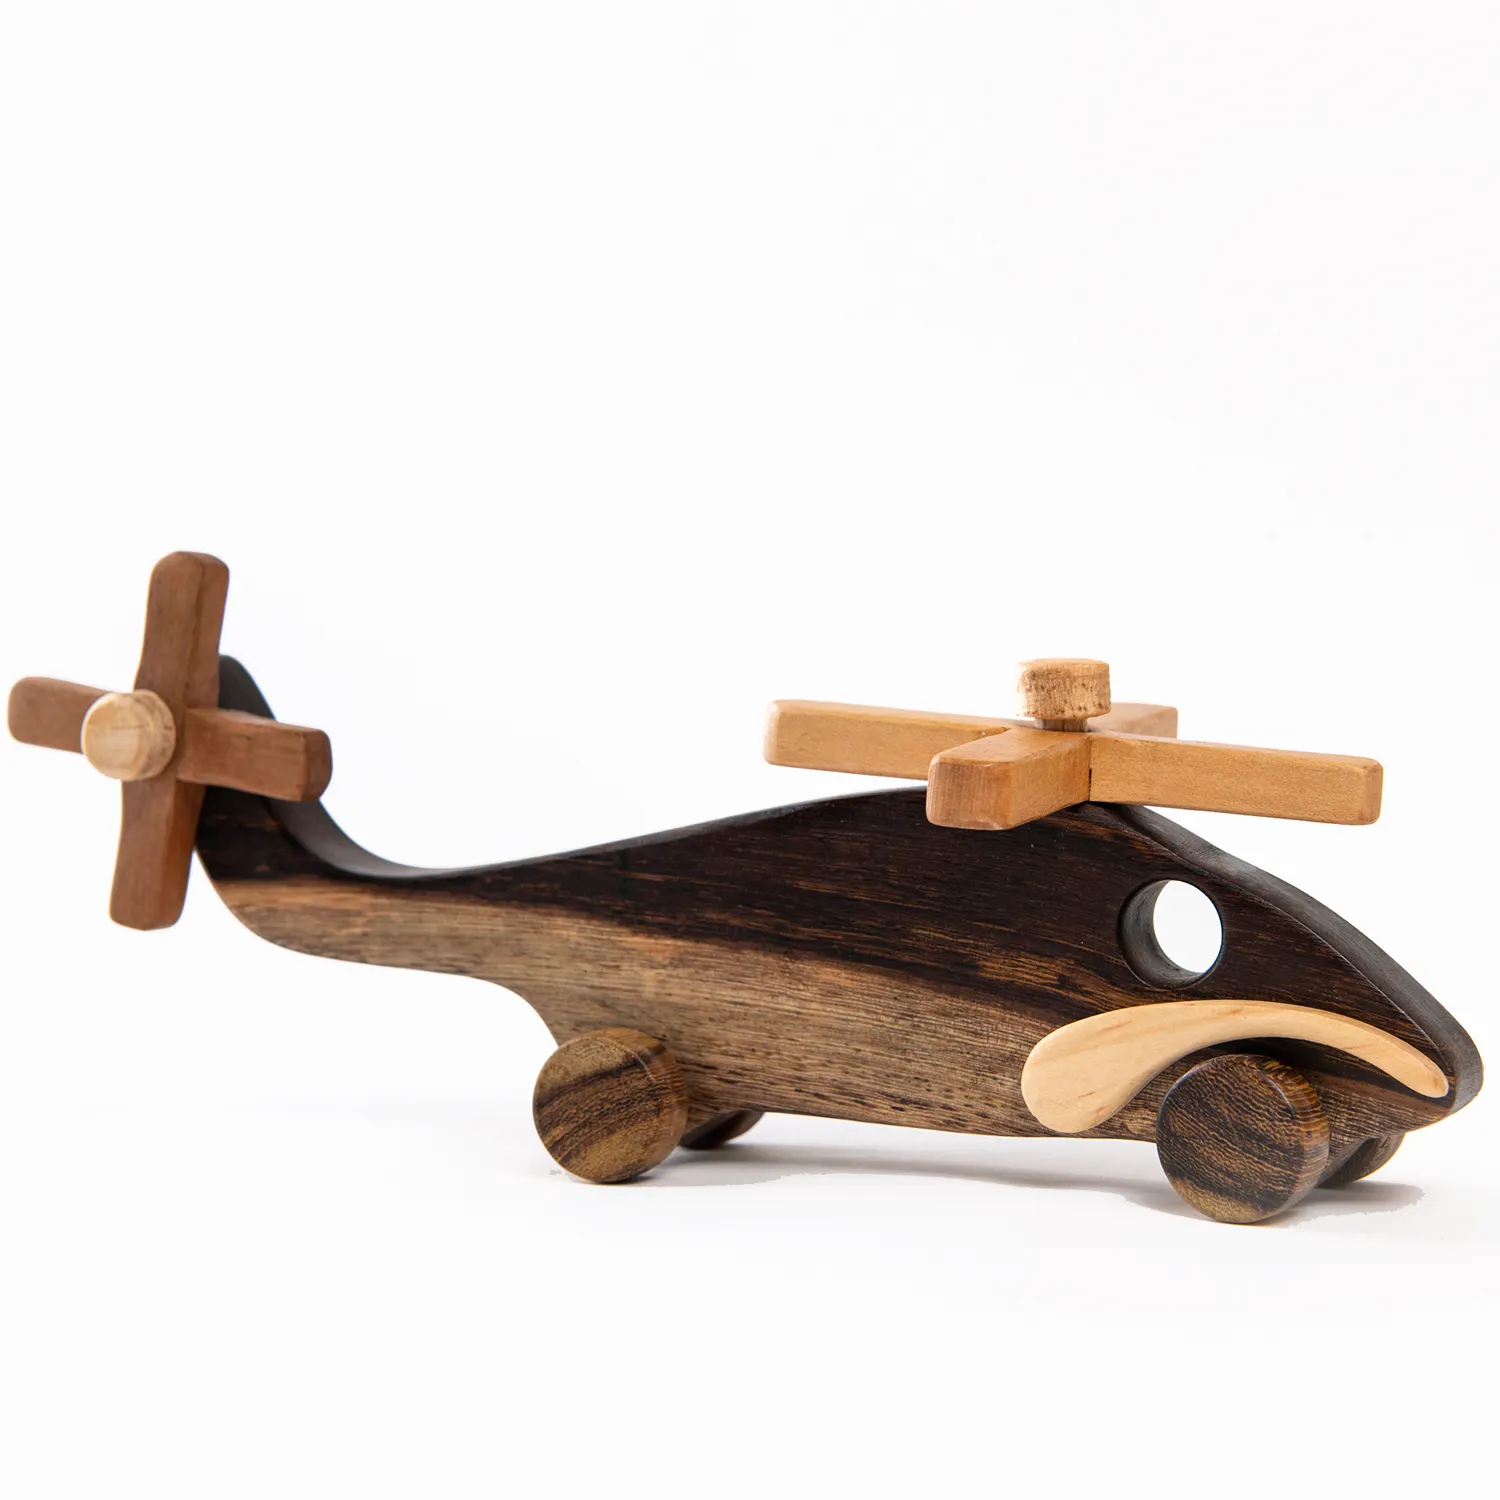 OEM - ODM Hot Amazon Wooden Helicopter Toys Cars for 1 2 3 Year Old Boys (Helicopter)